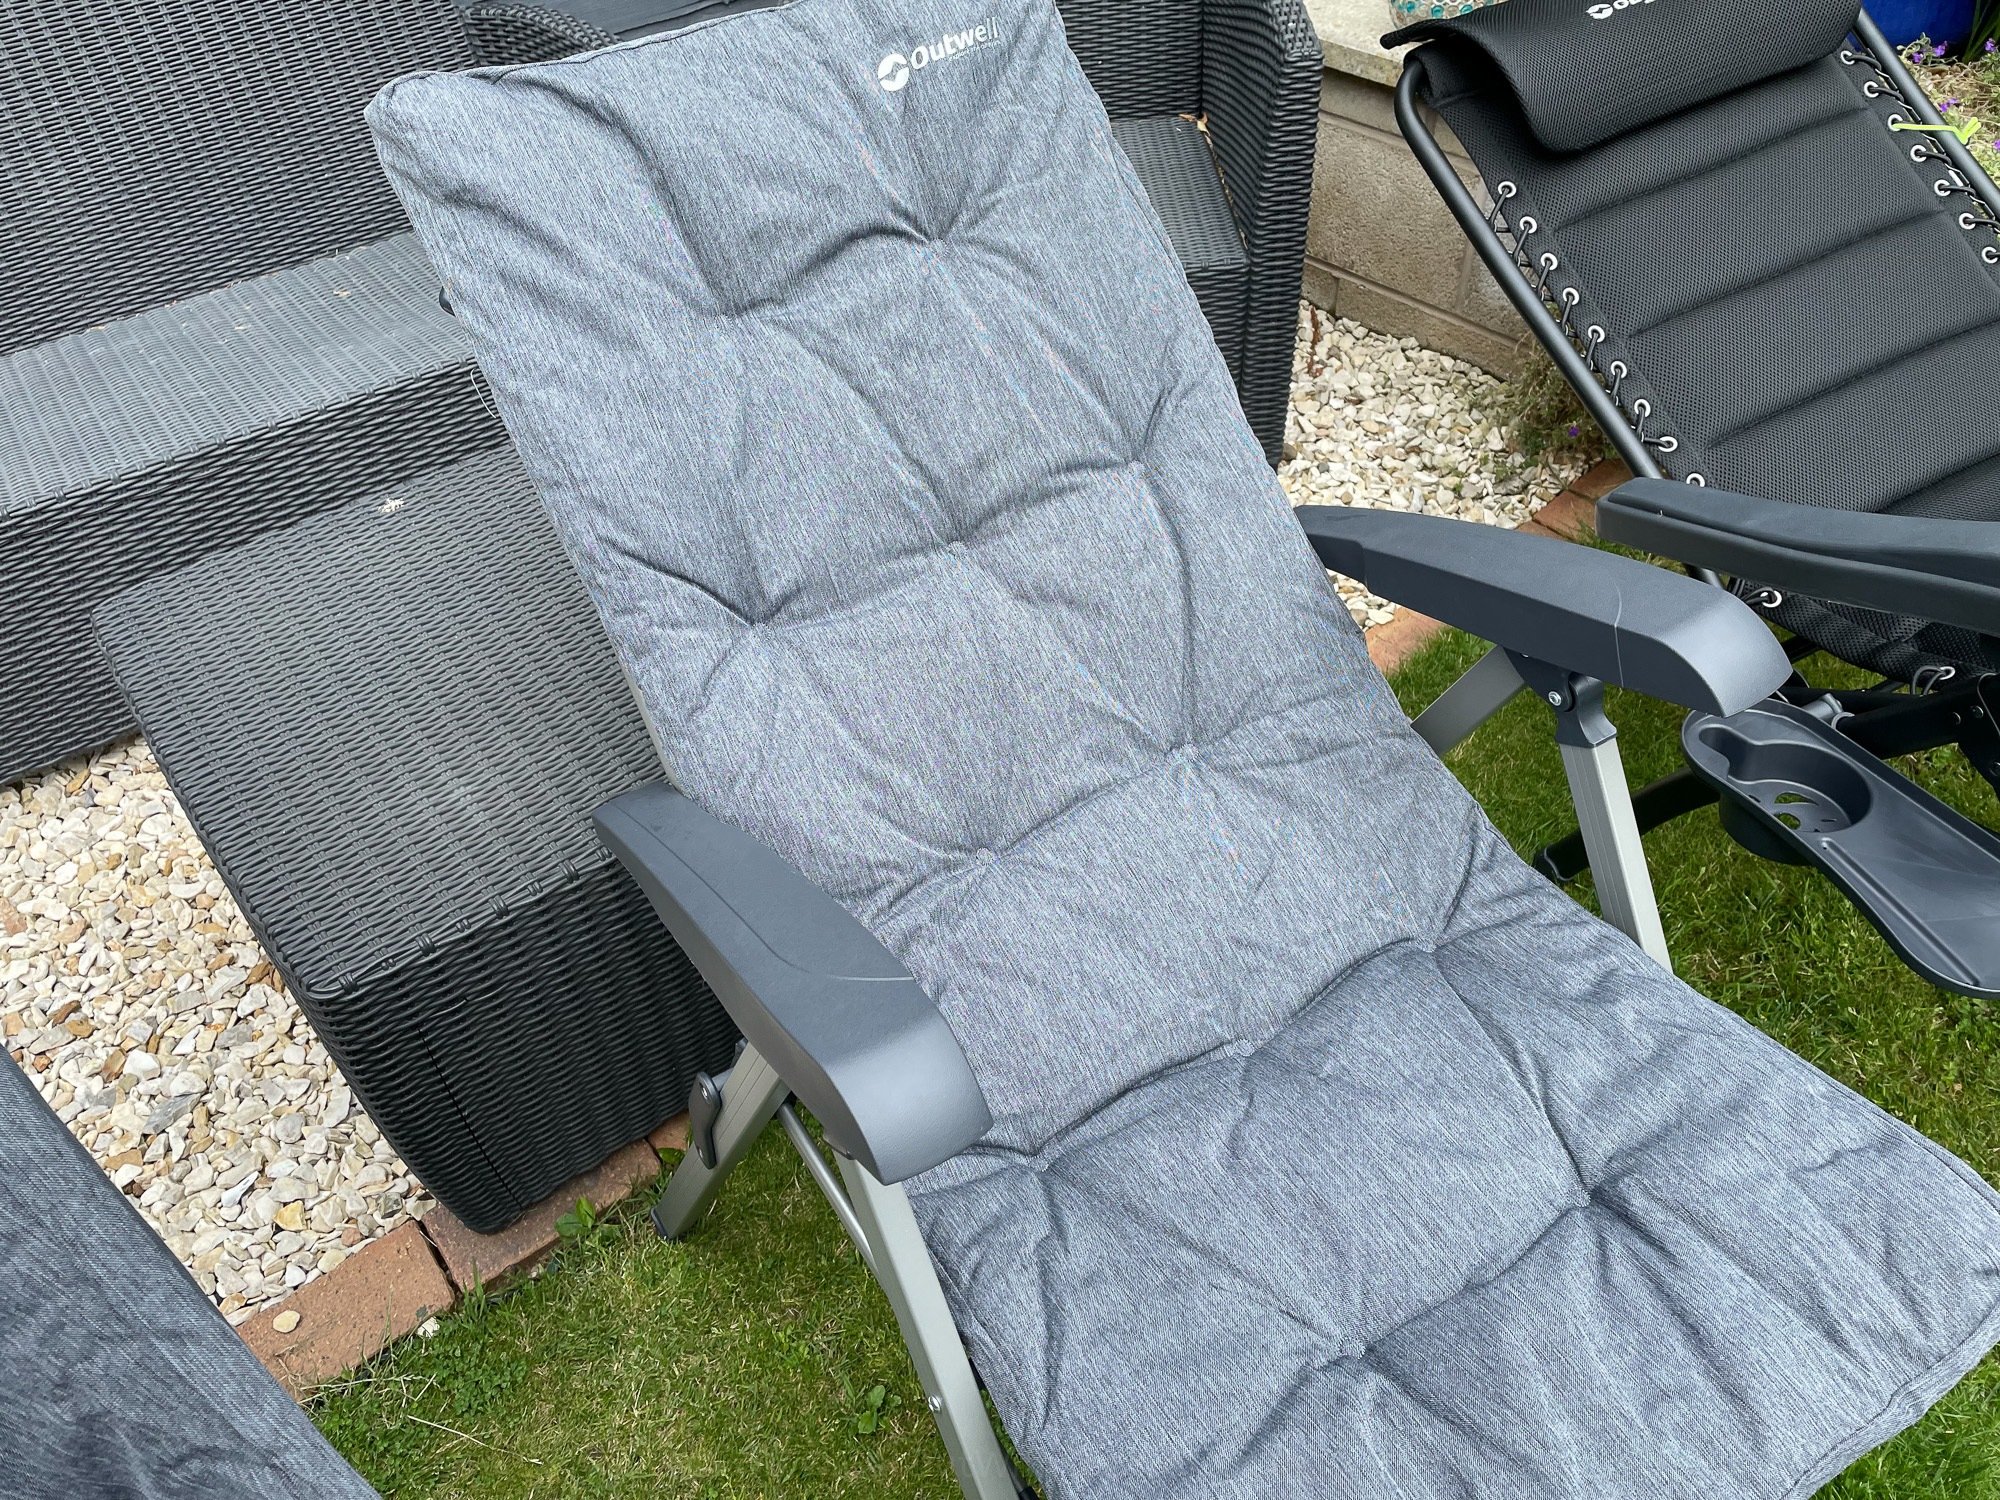 A view of the camping chair